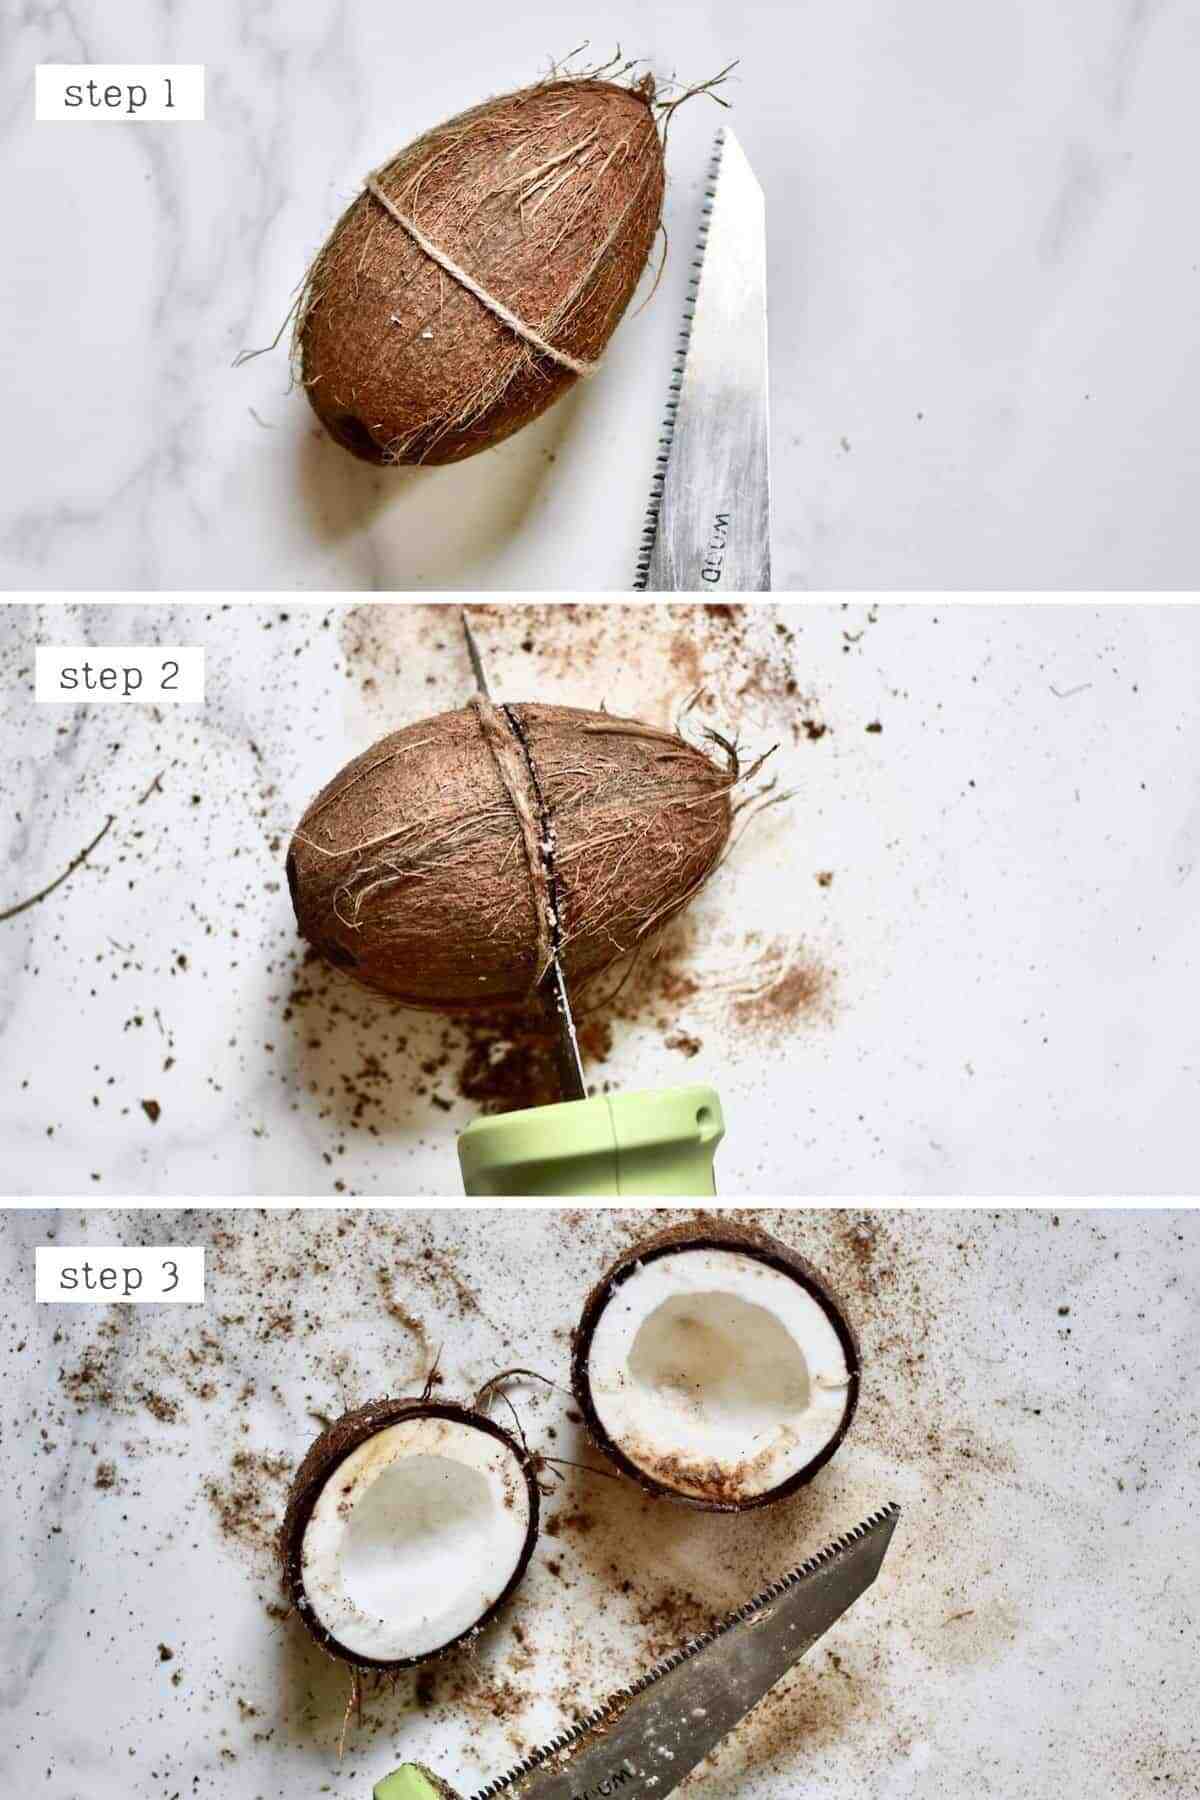 How do you open a coconut without spilling water?